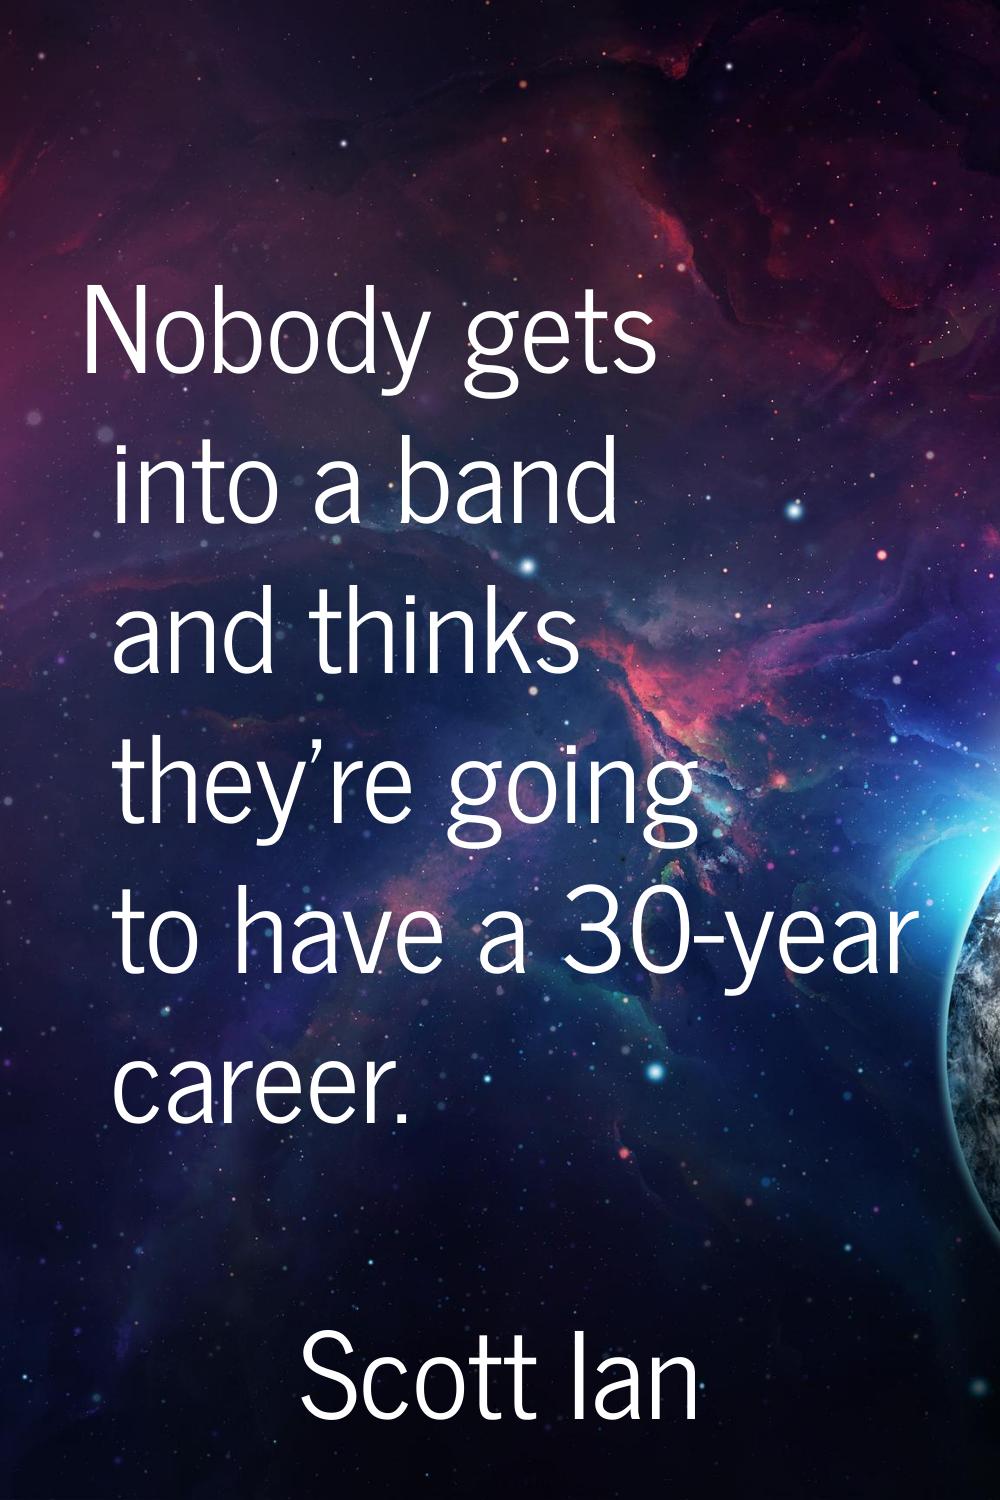 Nobody gets into a band and thinks they're going to have a 30-year career.